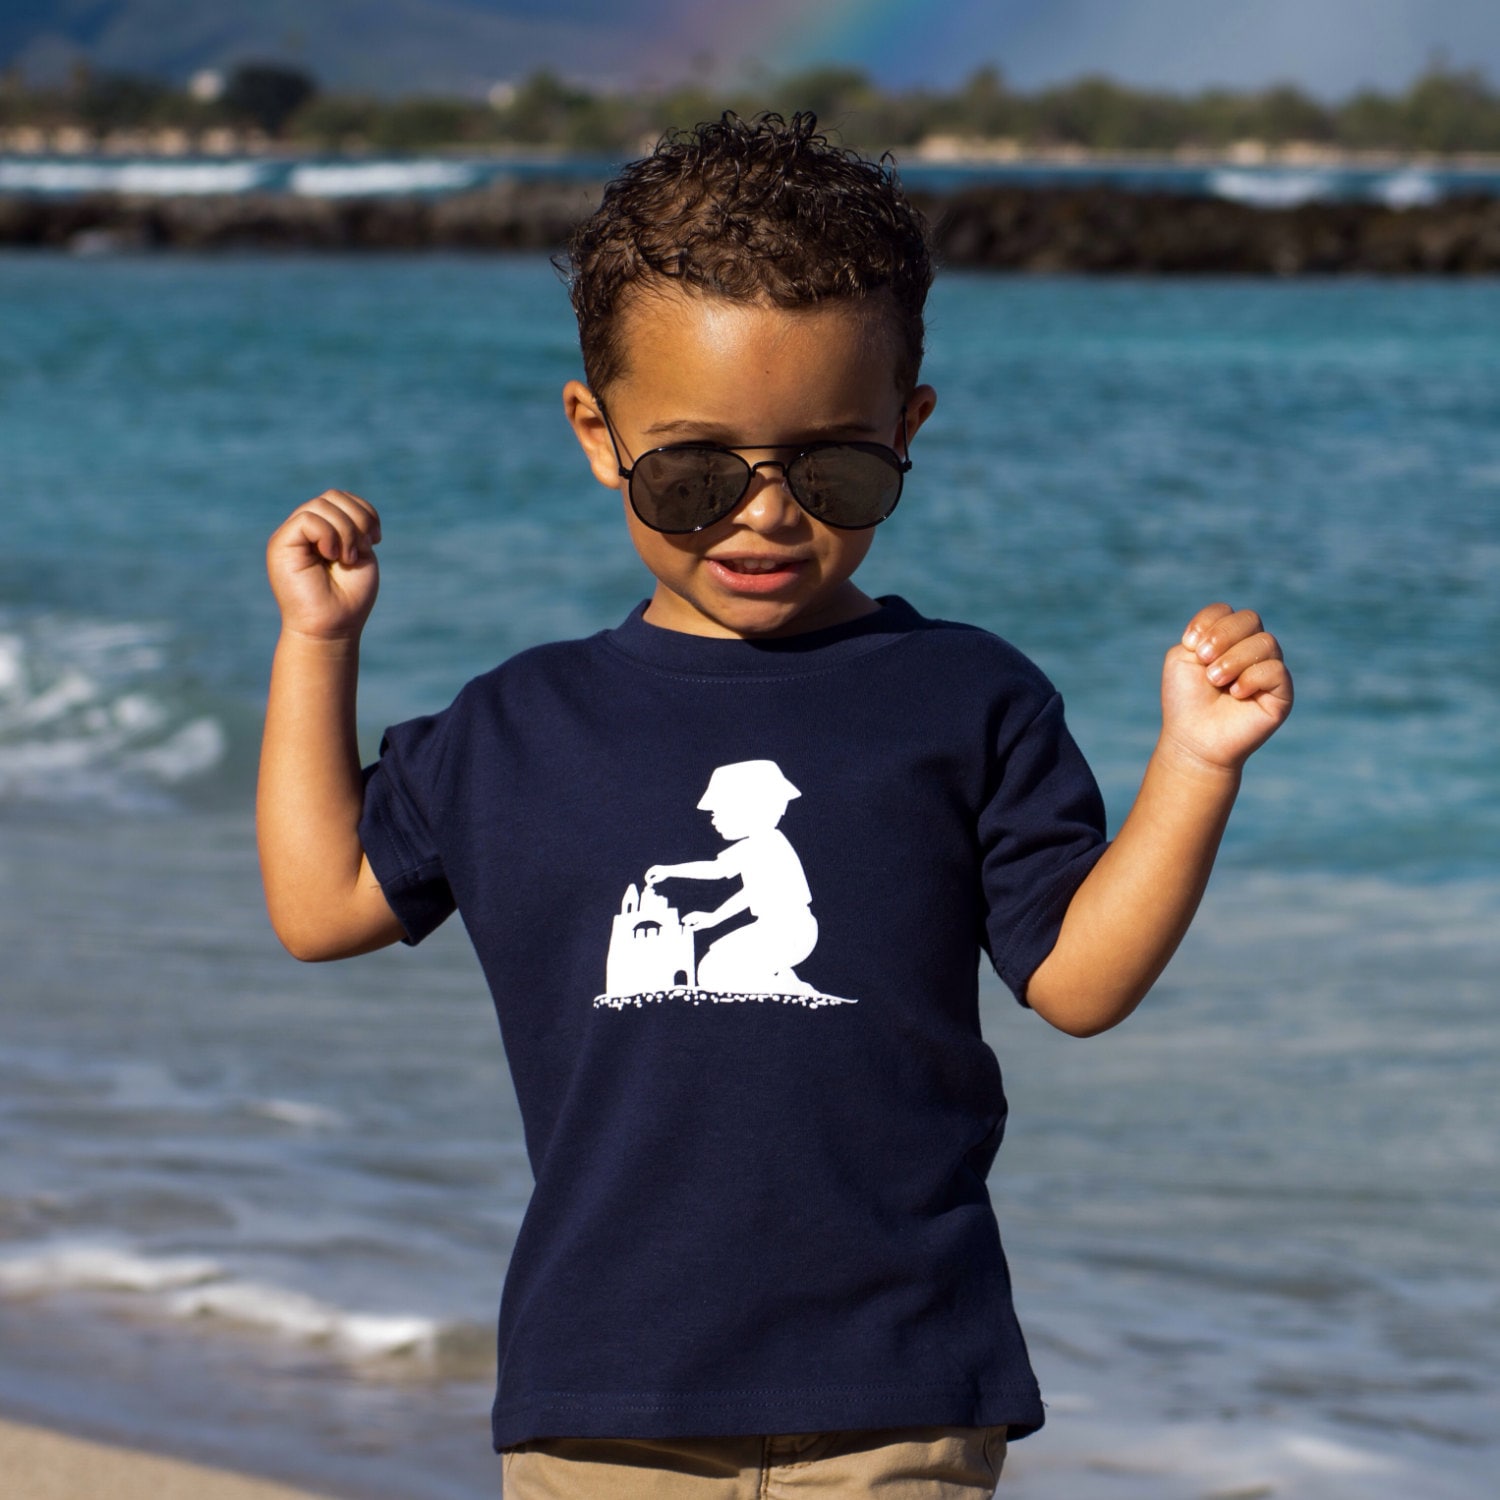 Sandcastles Short Sleeved Nostalgic Graphic Tee in Navy with White